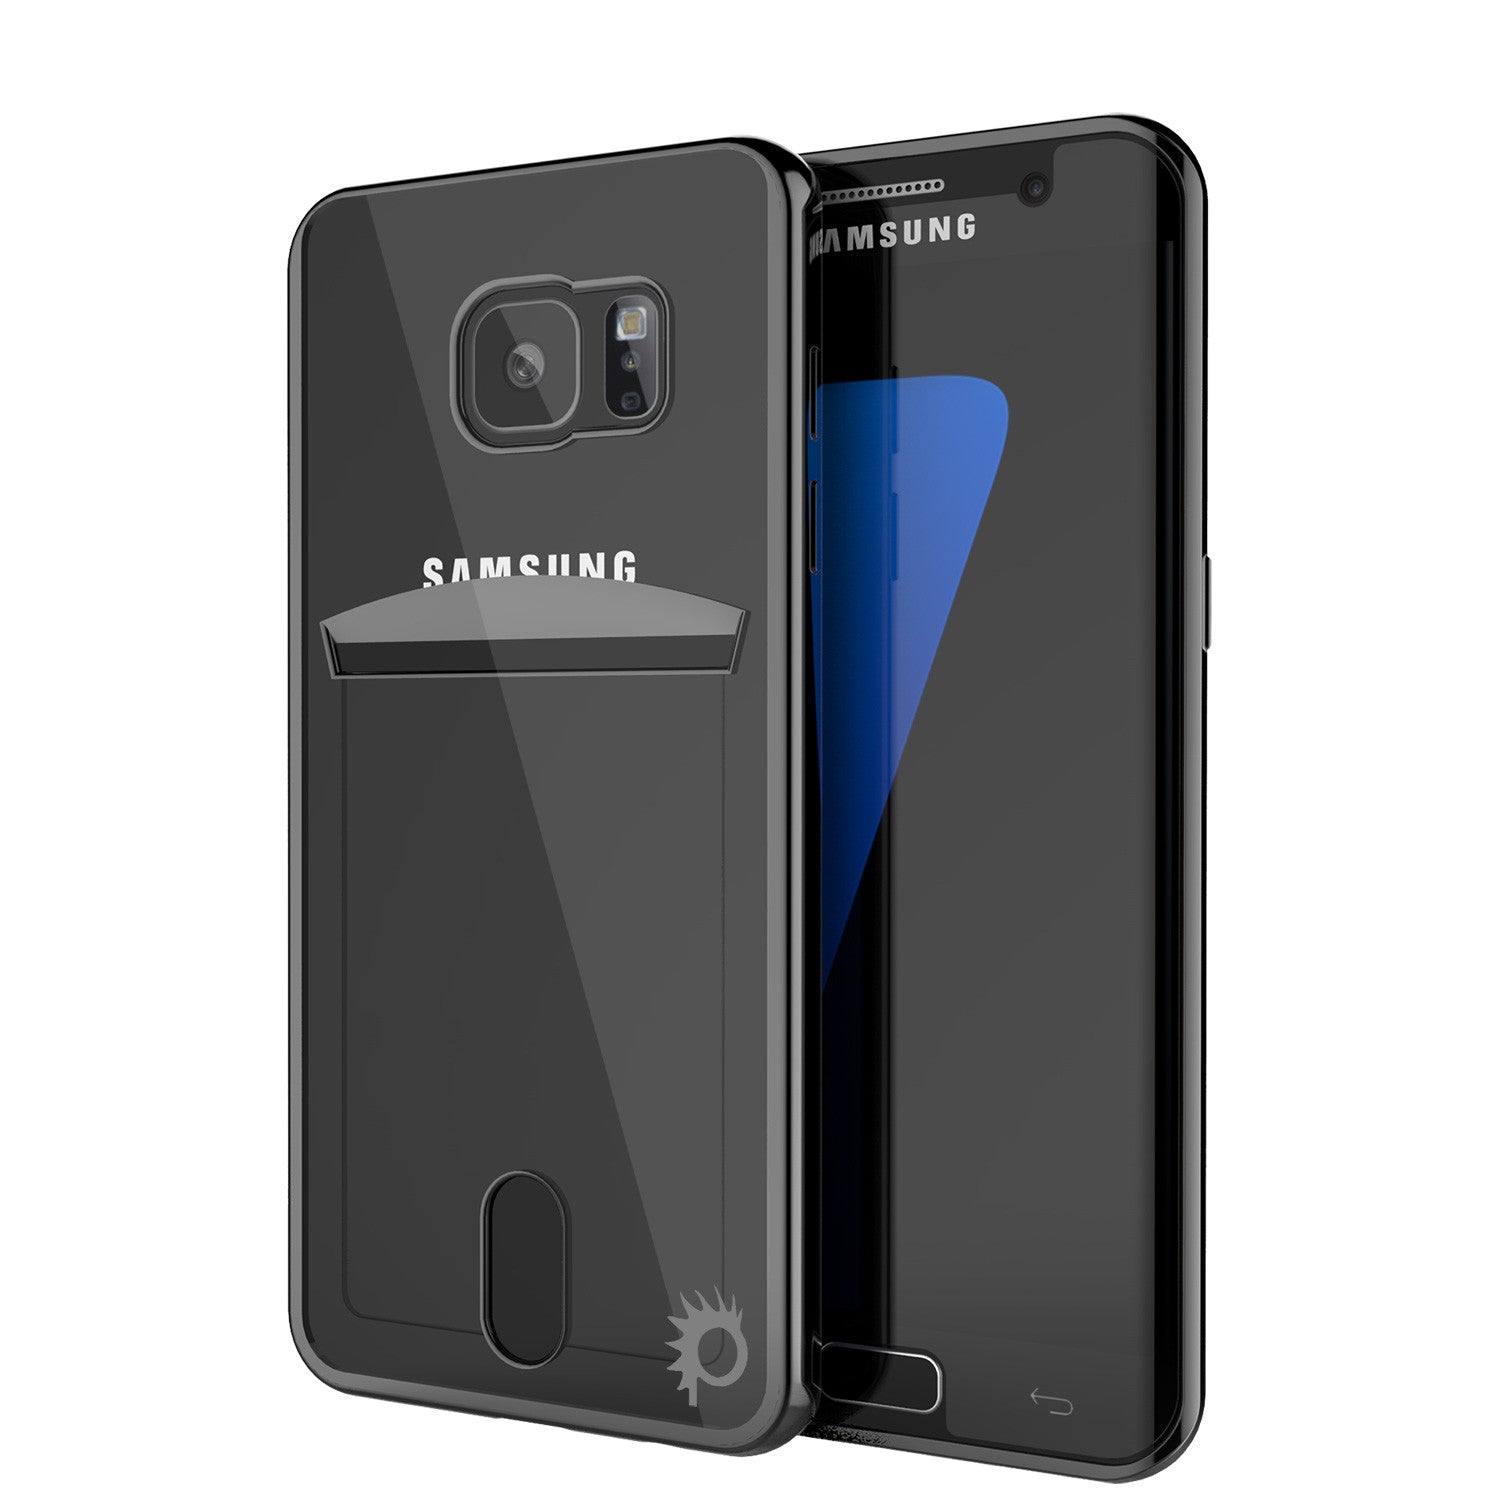 Galaxy s7 case with screen protector